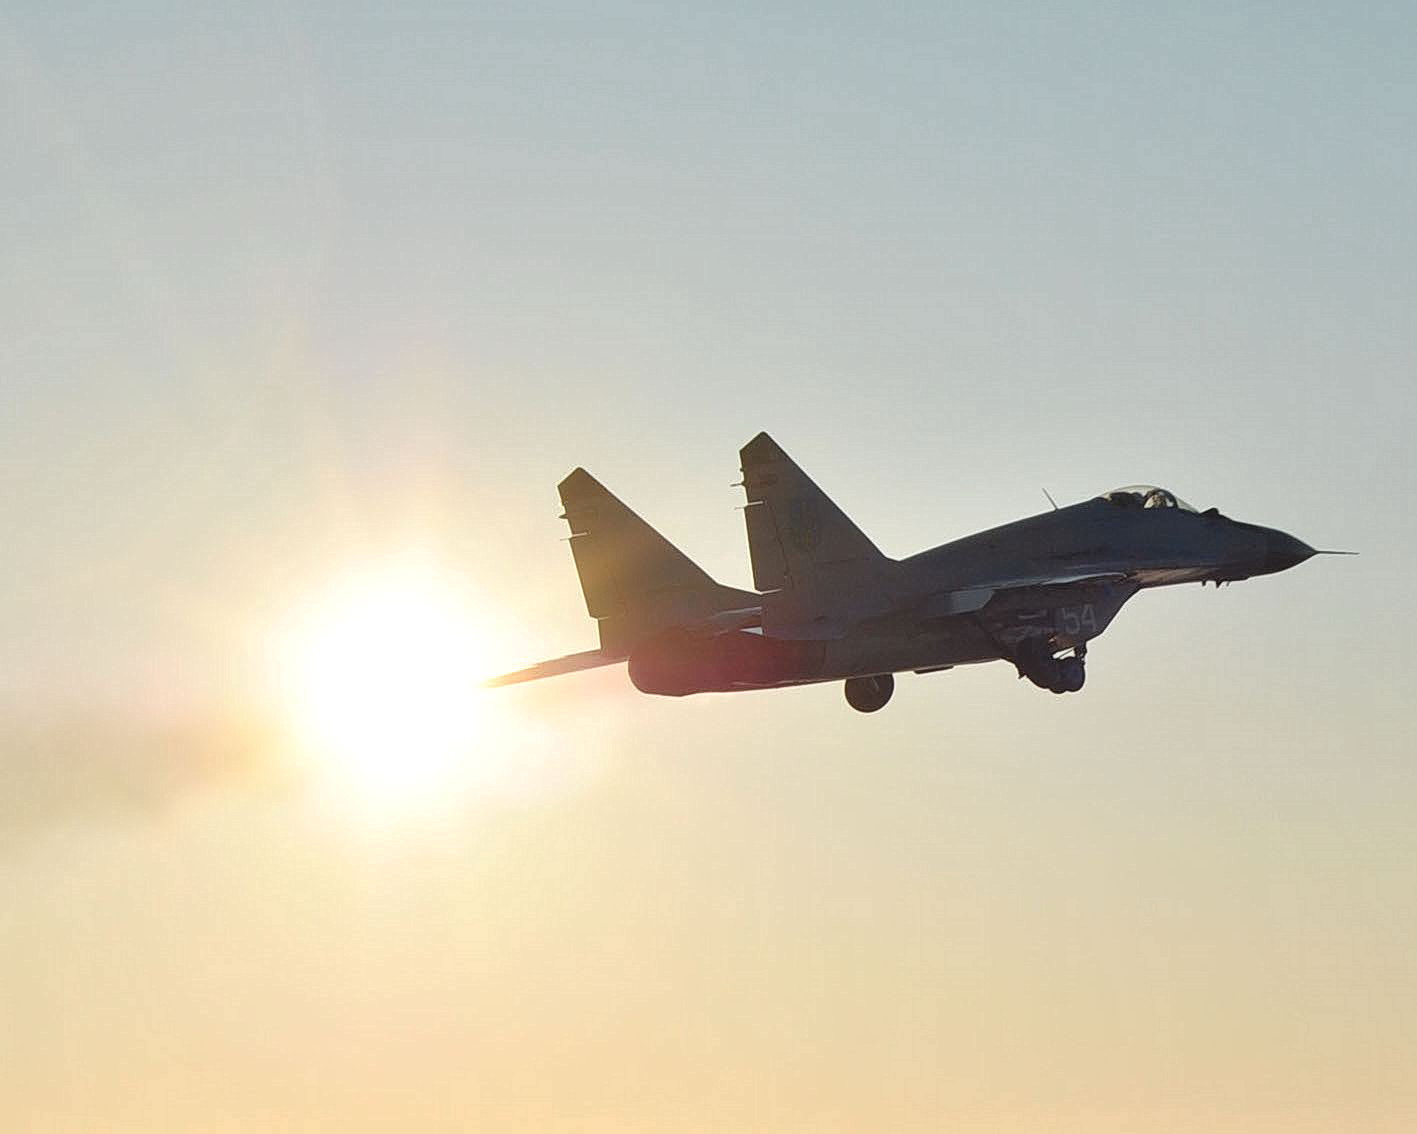 A Ukrainian Mikoyan MiG-29 maneuvers in the sky during a practice flight on Feb. 1, 2012.